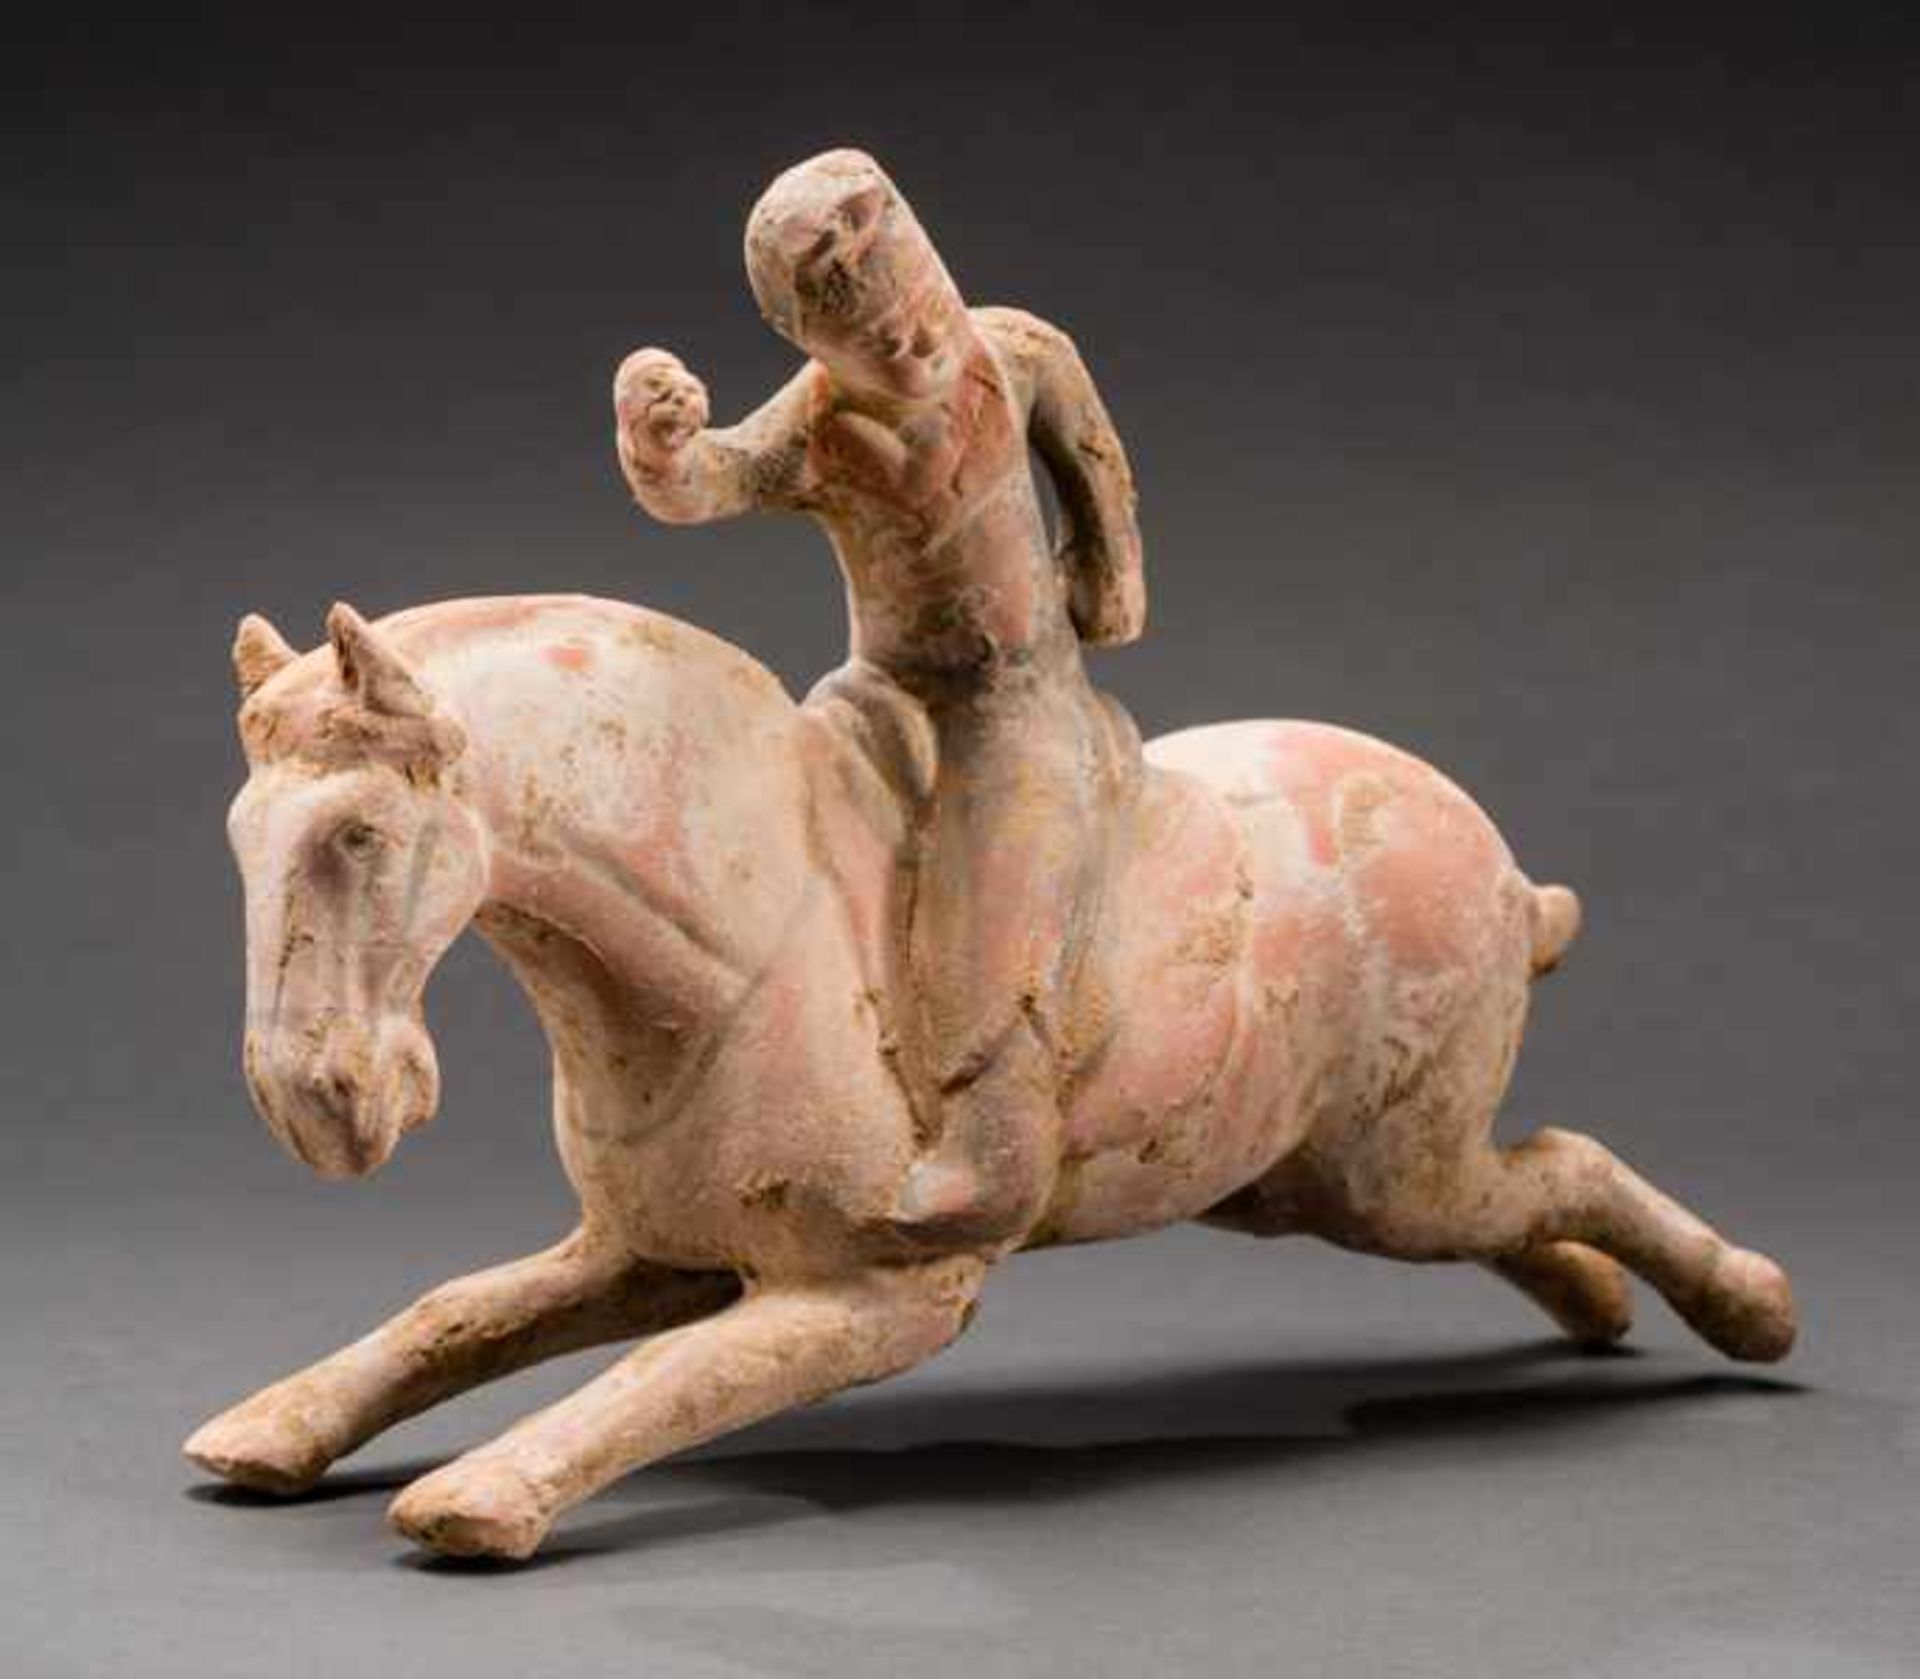 RUNNING HORSE WITH FEMALE POLO PLAYER Terracotta with remnants of original painting. China, Tang